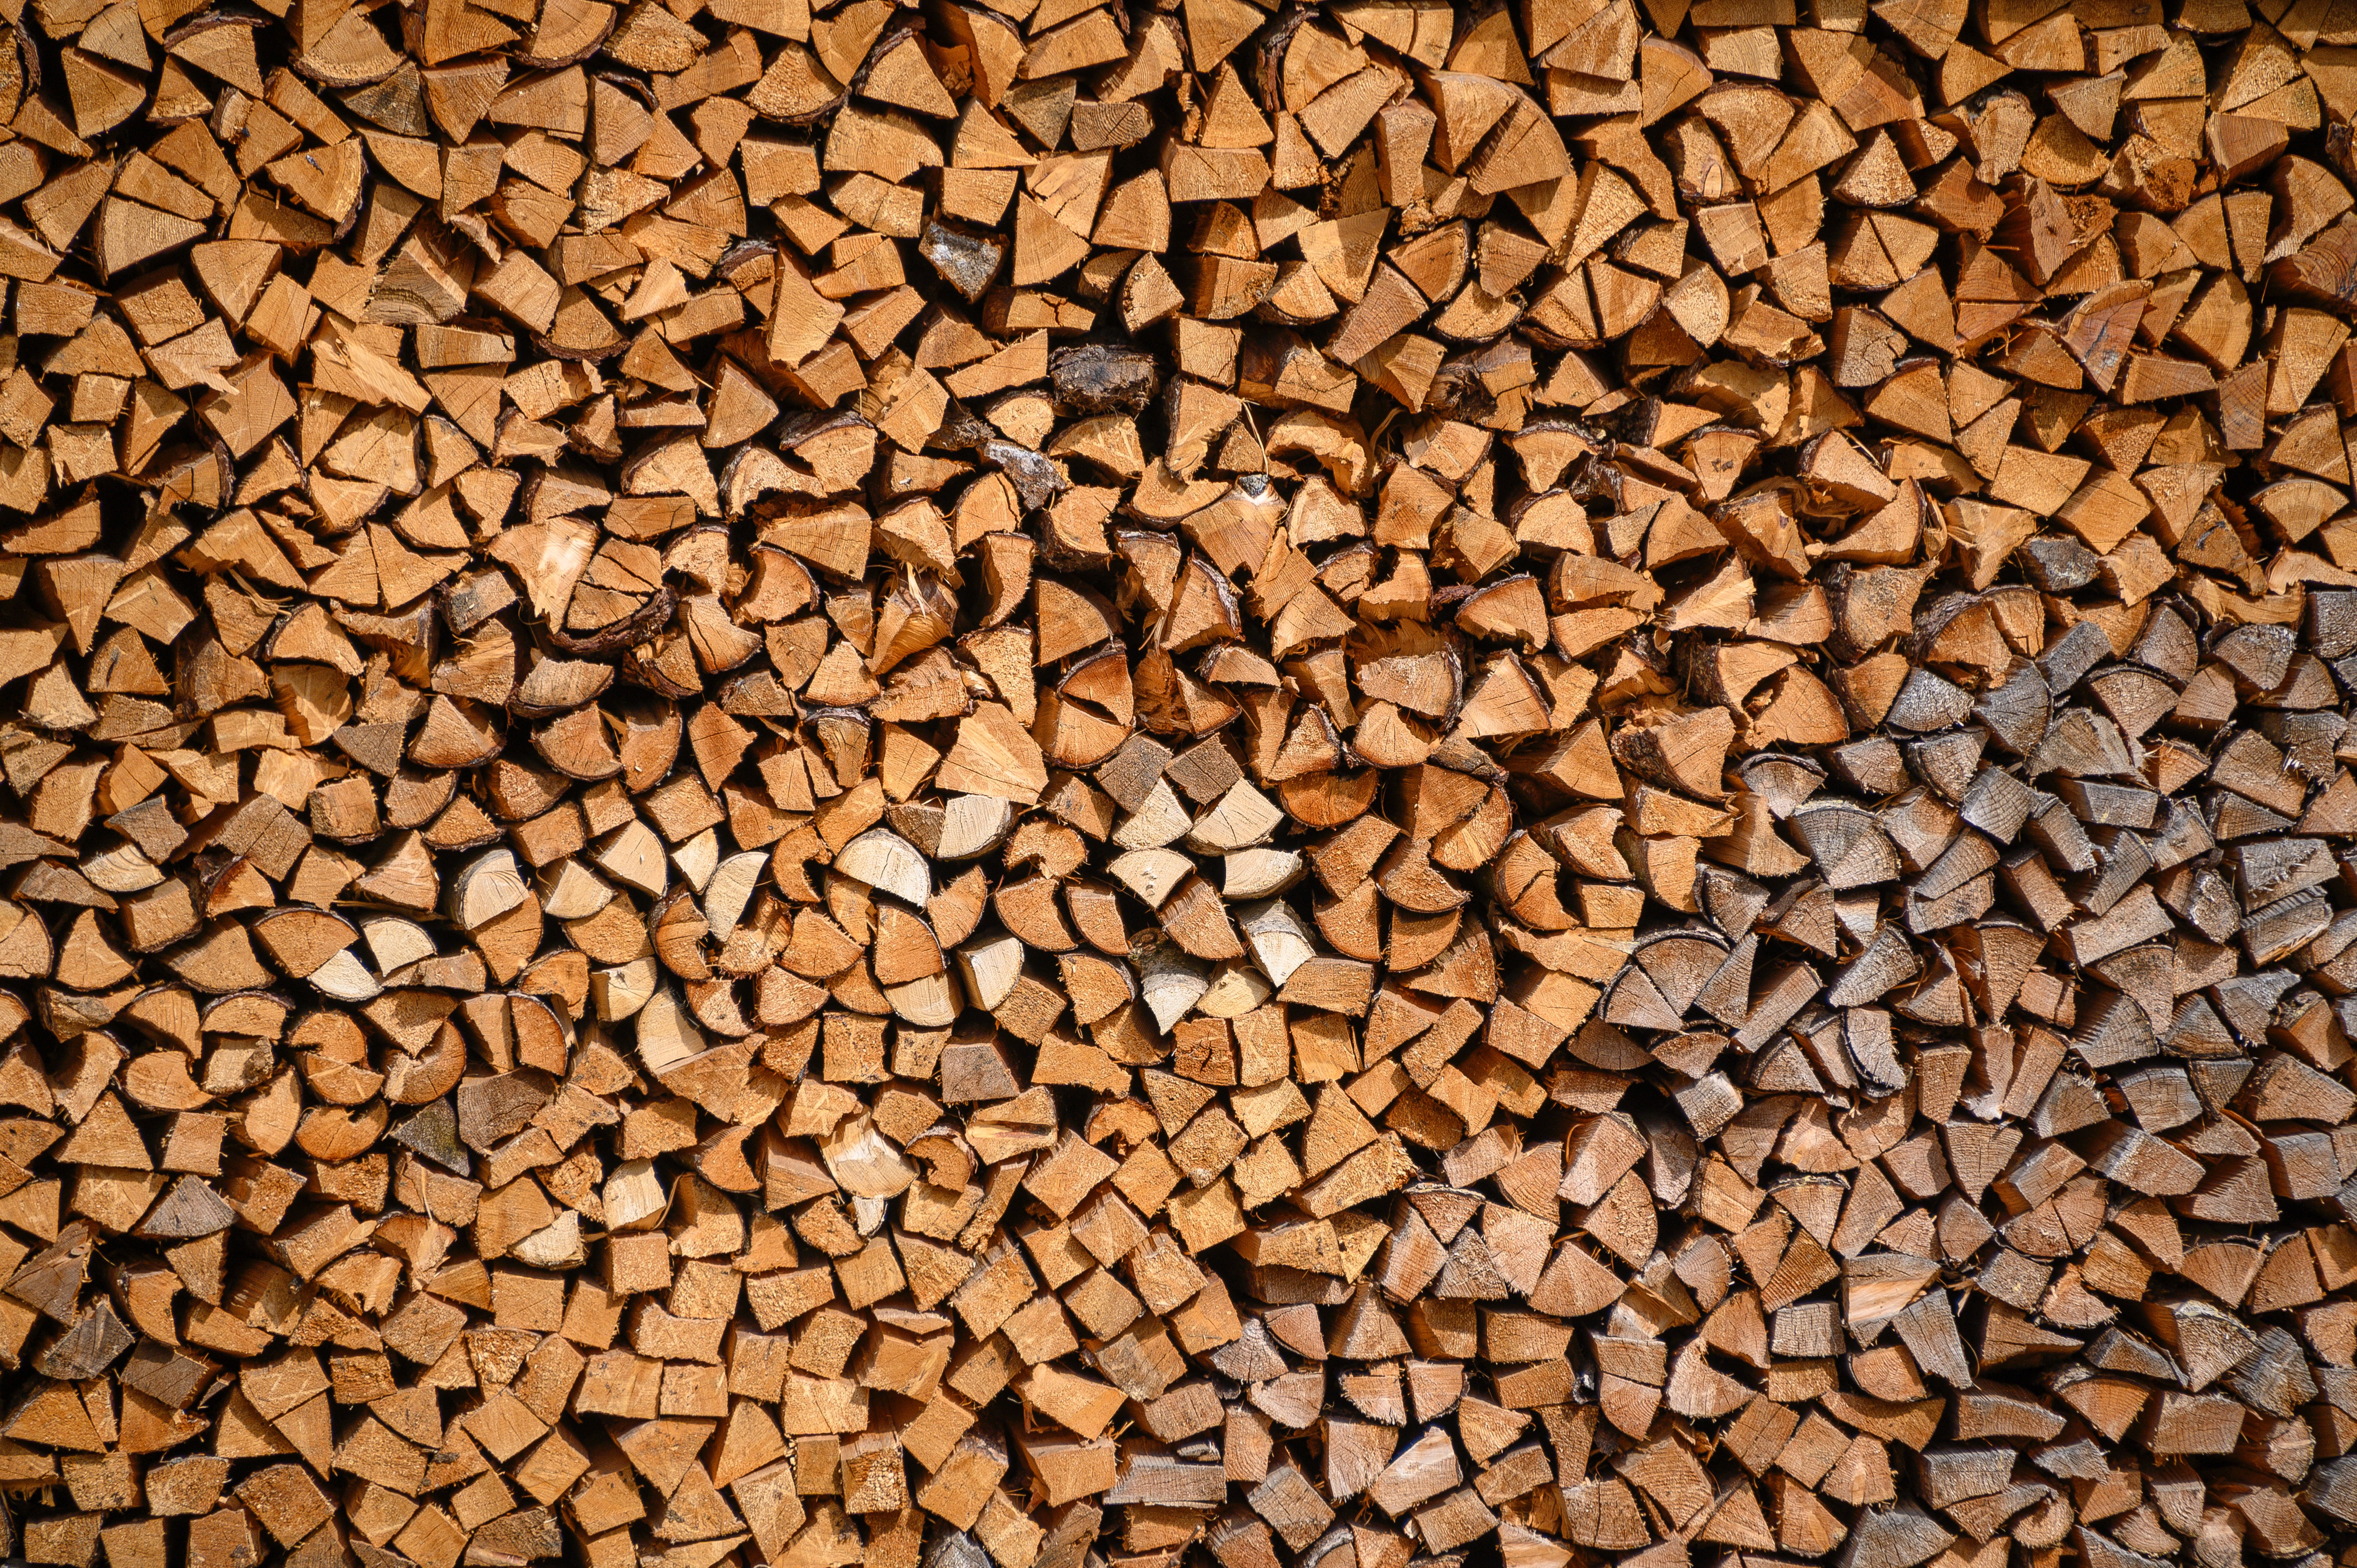 Manufacture of other wood treatment articles, inc chips, particles, wood wool etc in Lääne-Viru county